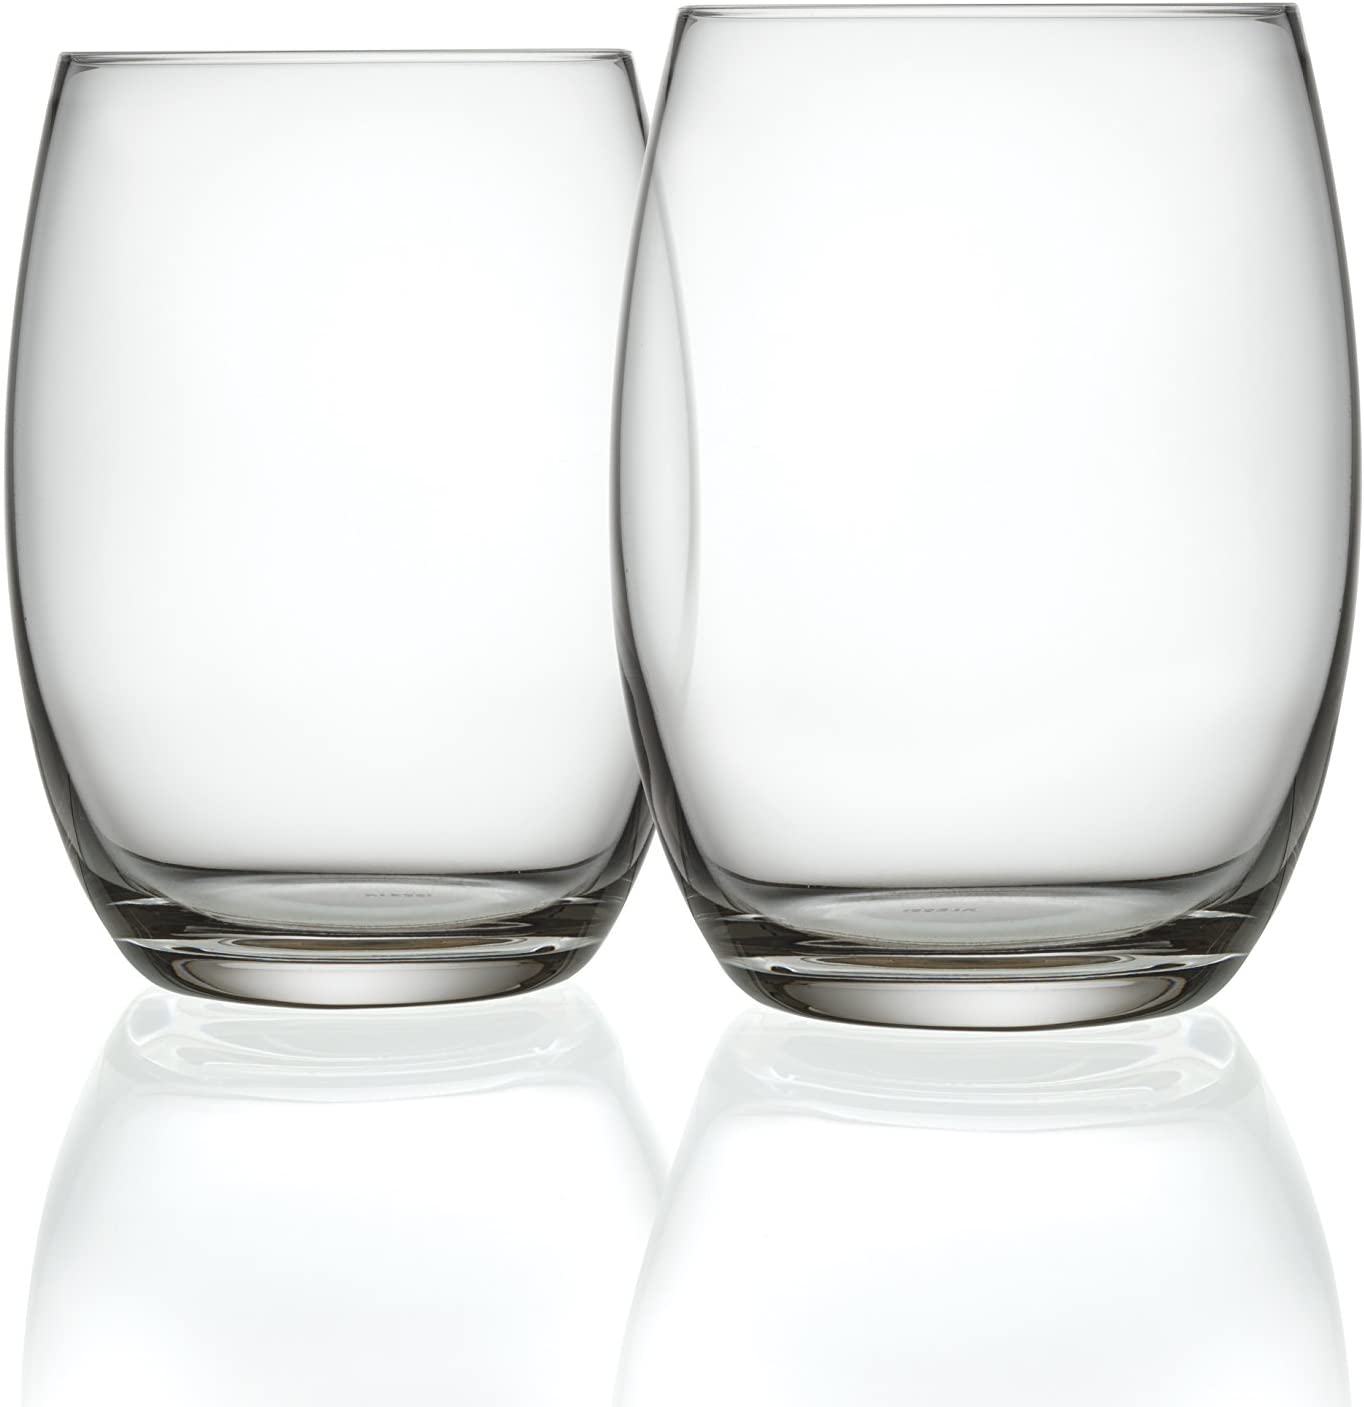 \'Alessi \"Mami XL Pack of 2 long drink glasses made from crystal glass